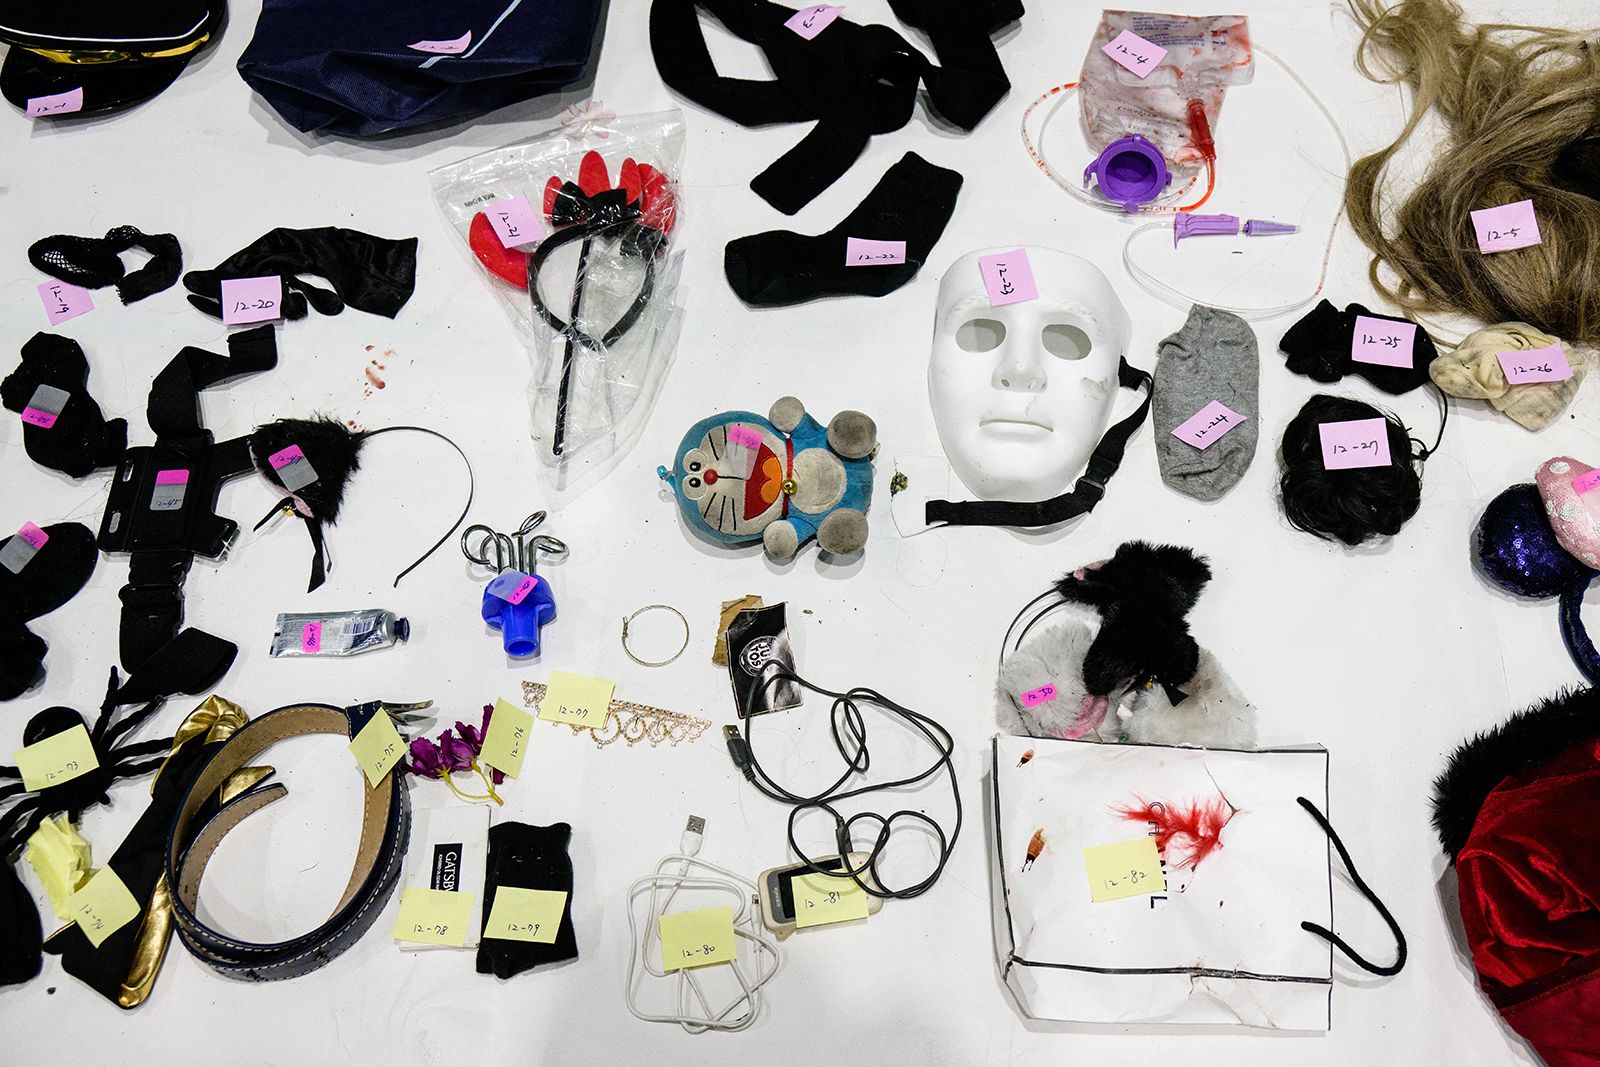 Families of Halloween crush victims identify lost items as South Korean police admit mistakes